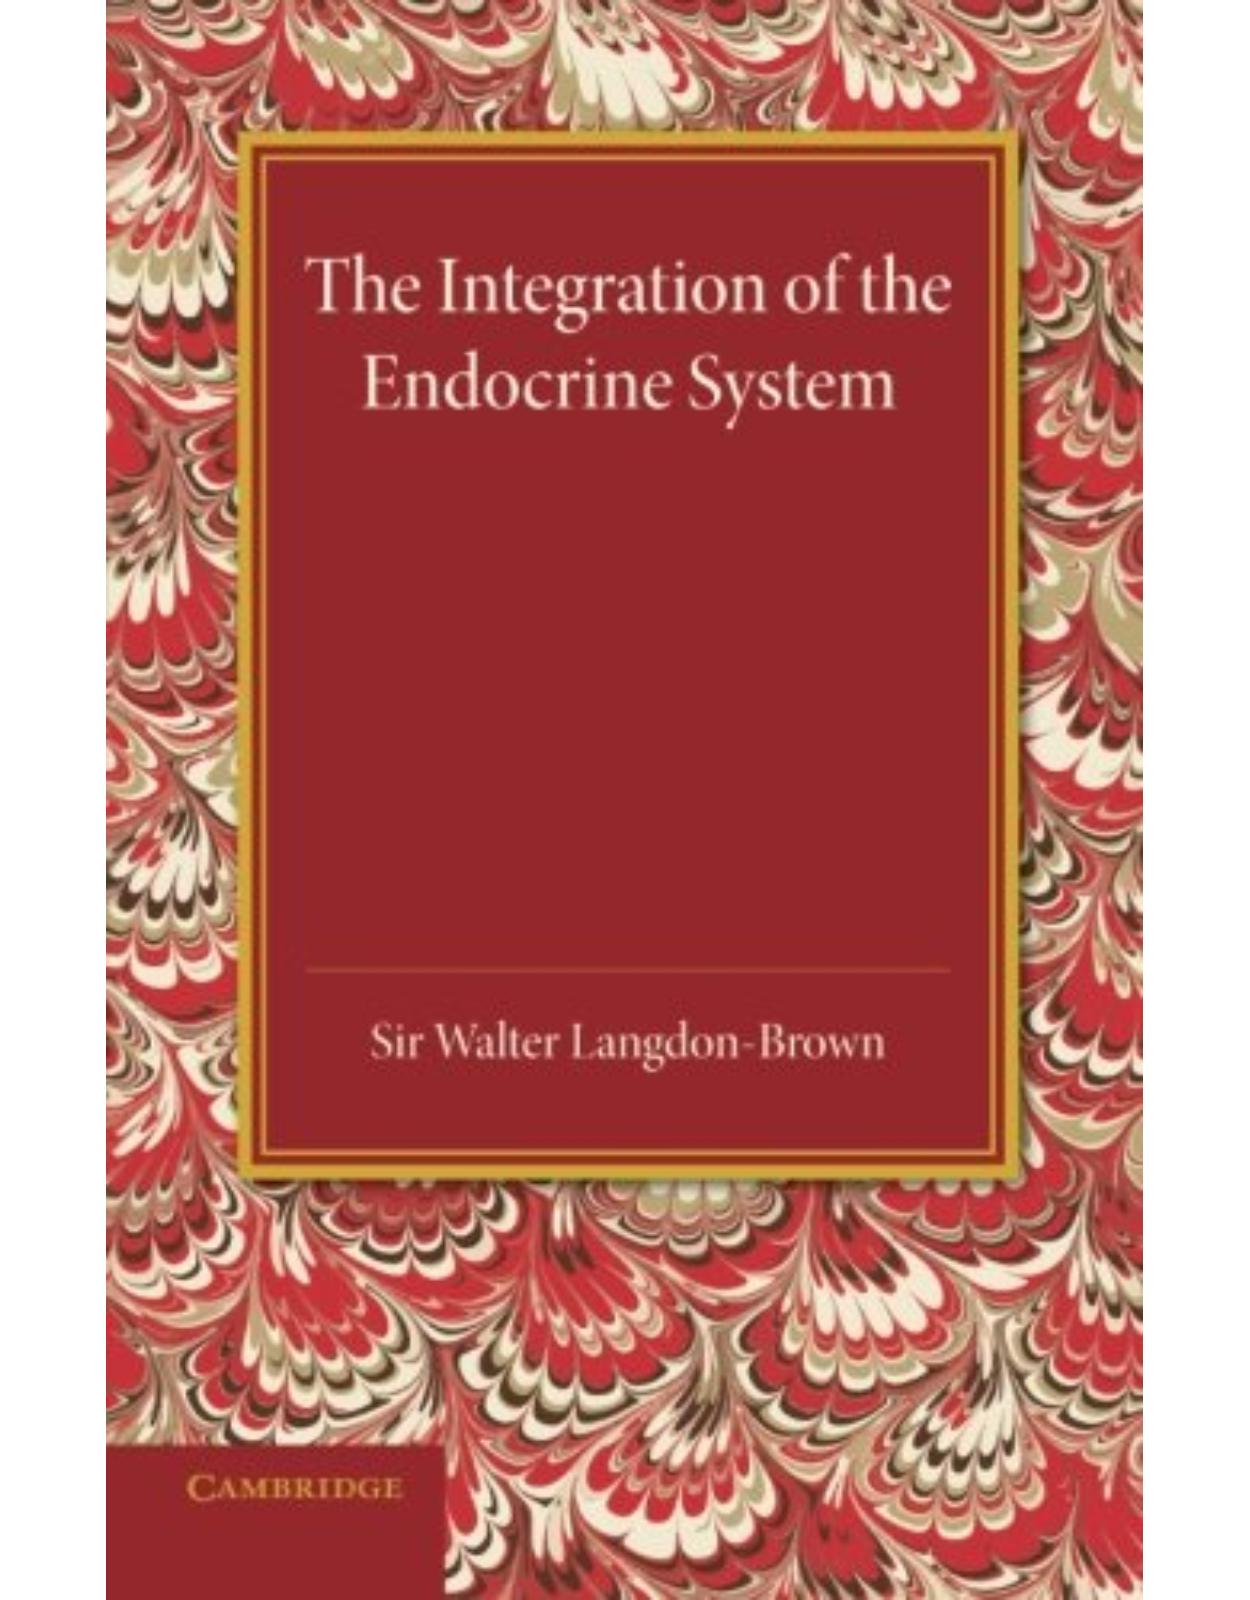 The Integration of the Endocrine System: Horsley Memorial Lecture